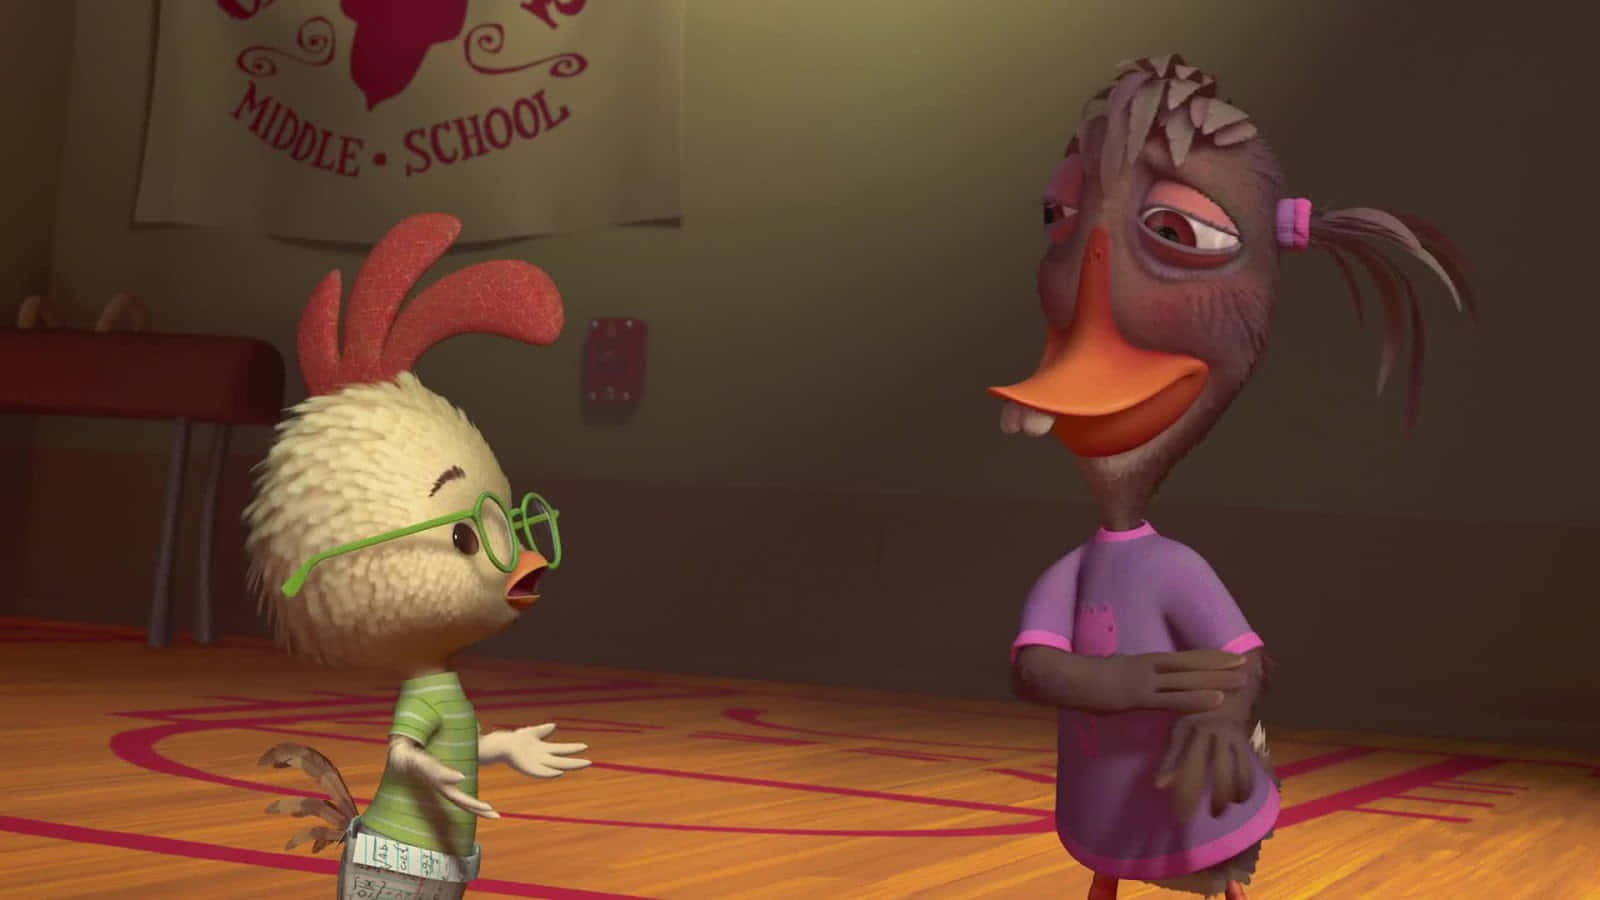 Chicken Little is filled with joy at the sight of an acorn, a symbol of hope